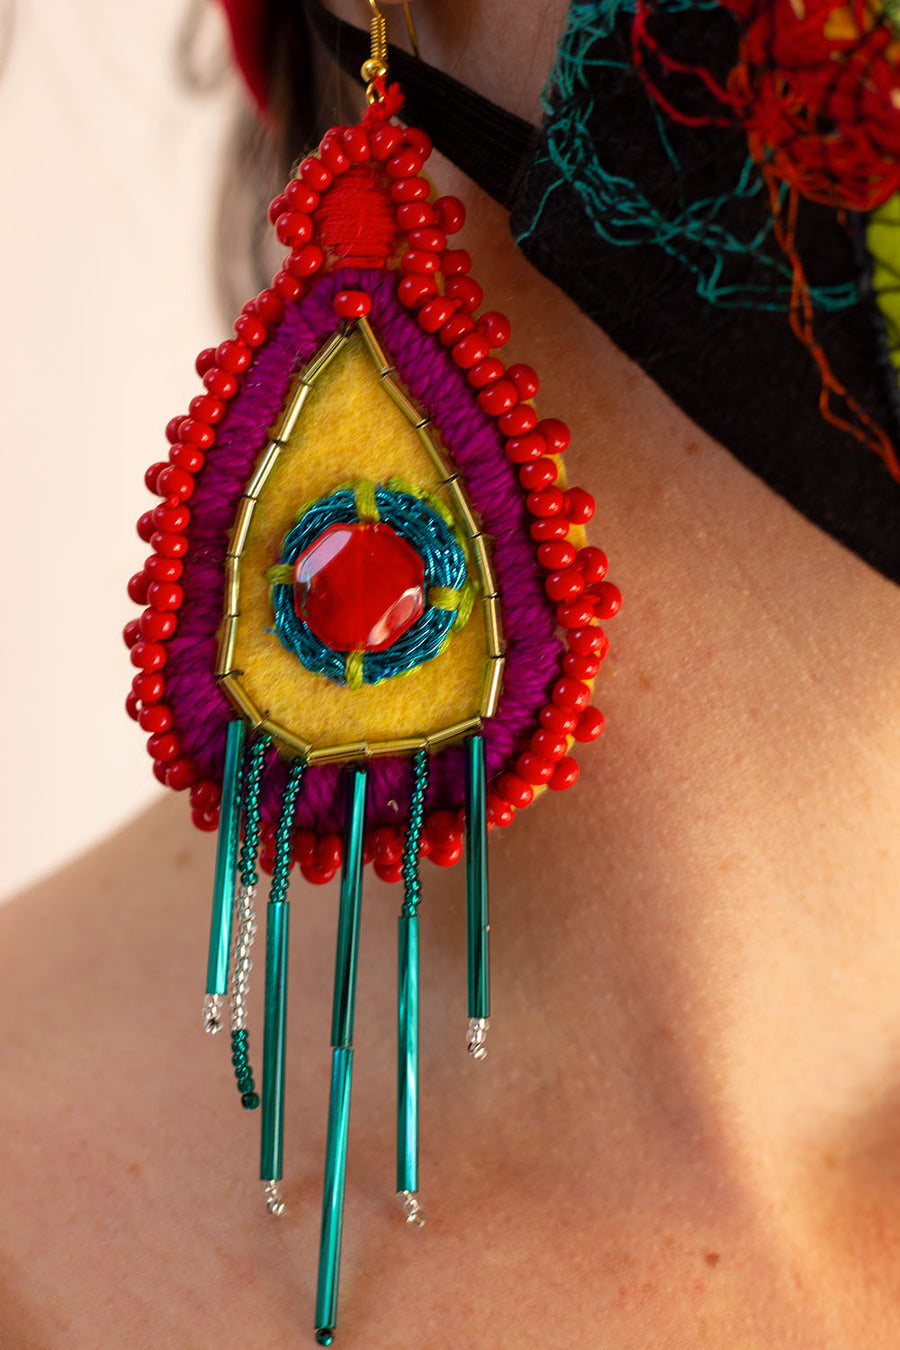 RED-YELLOW-PLUM-TURQUOISE EMBROIDERED EARRING